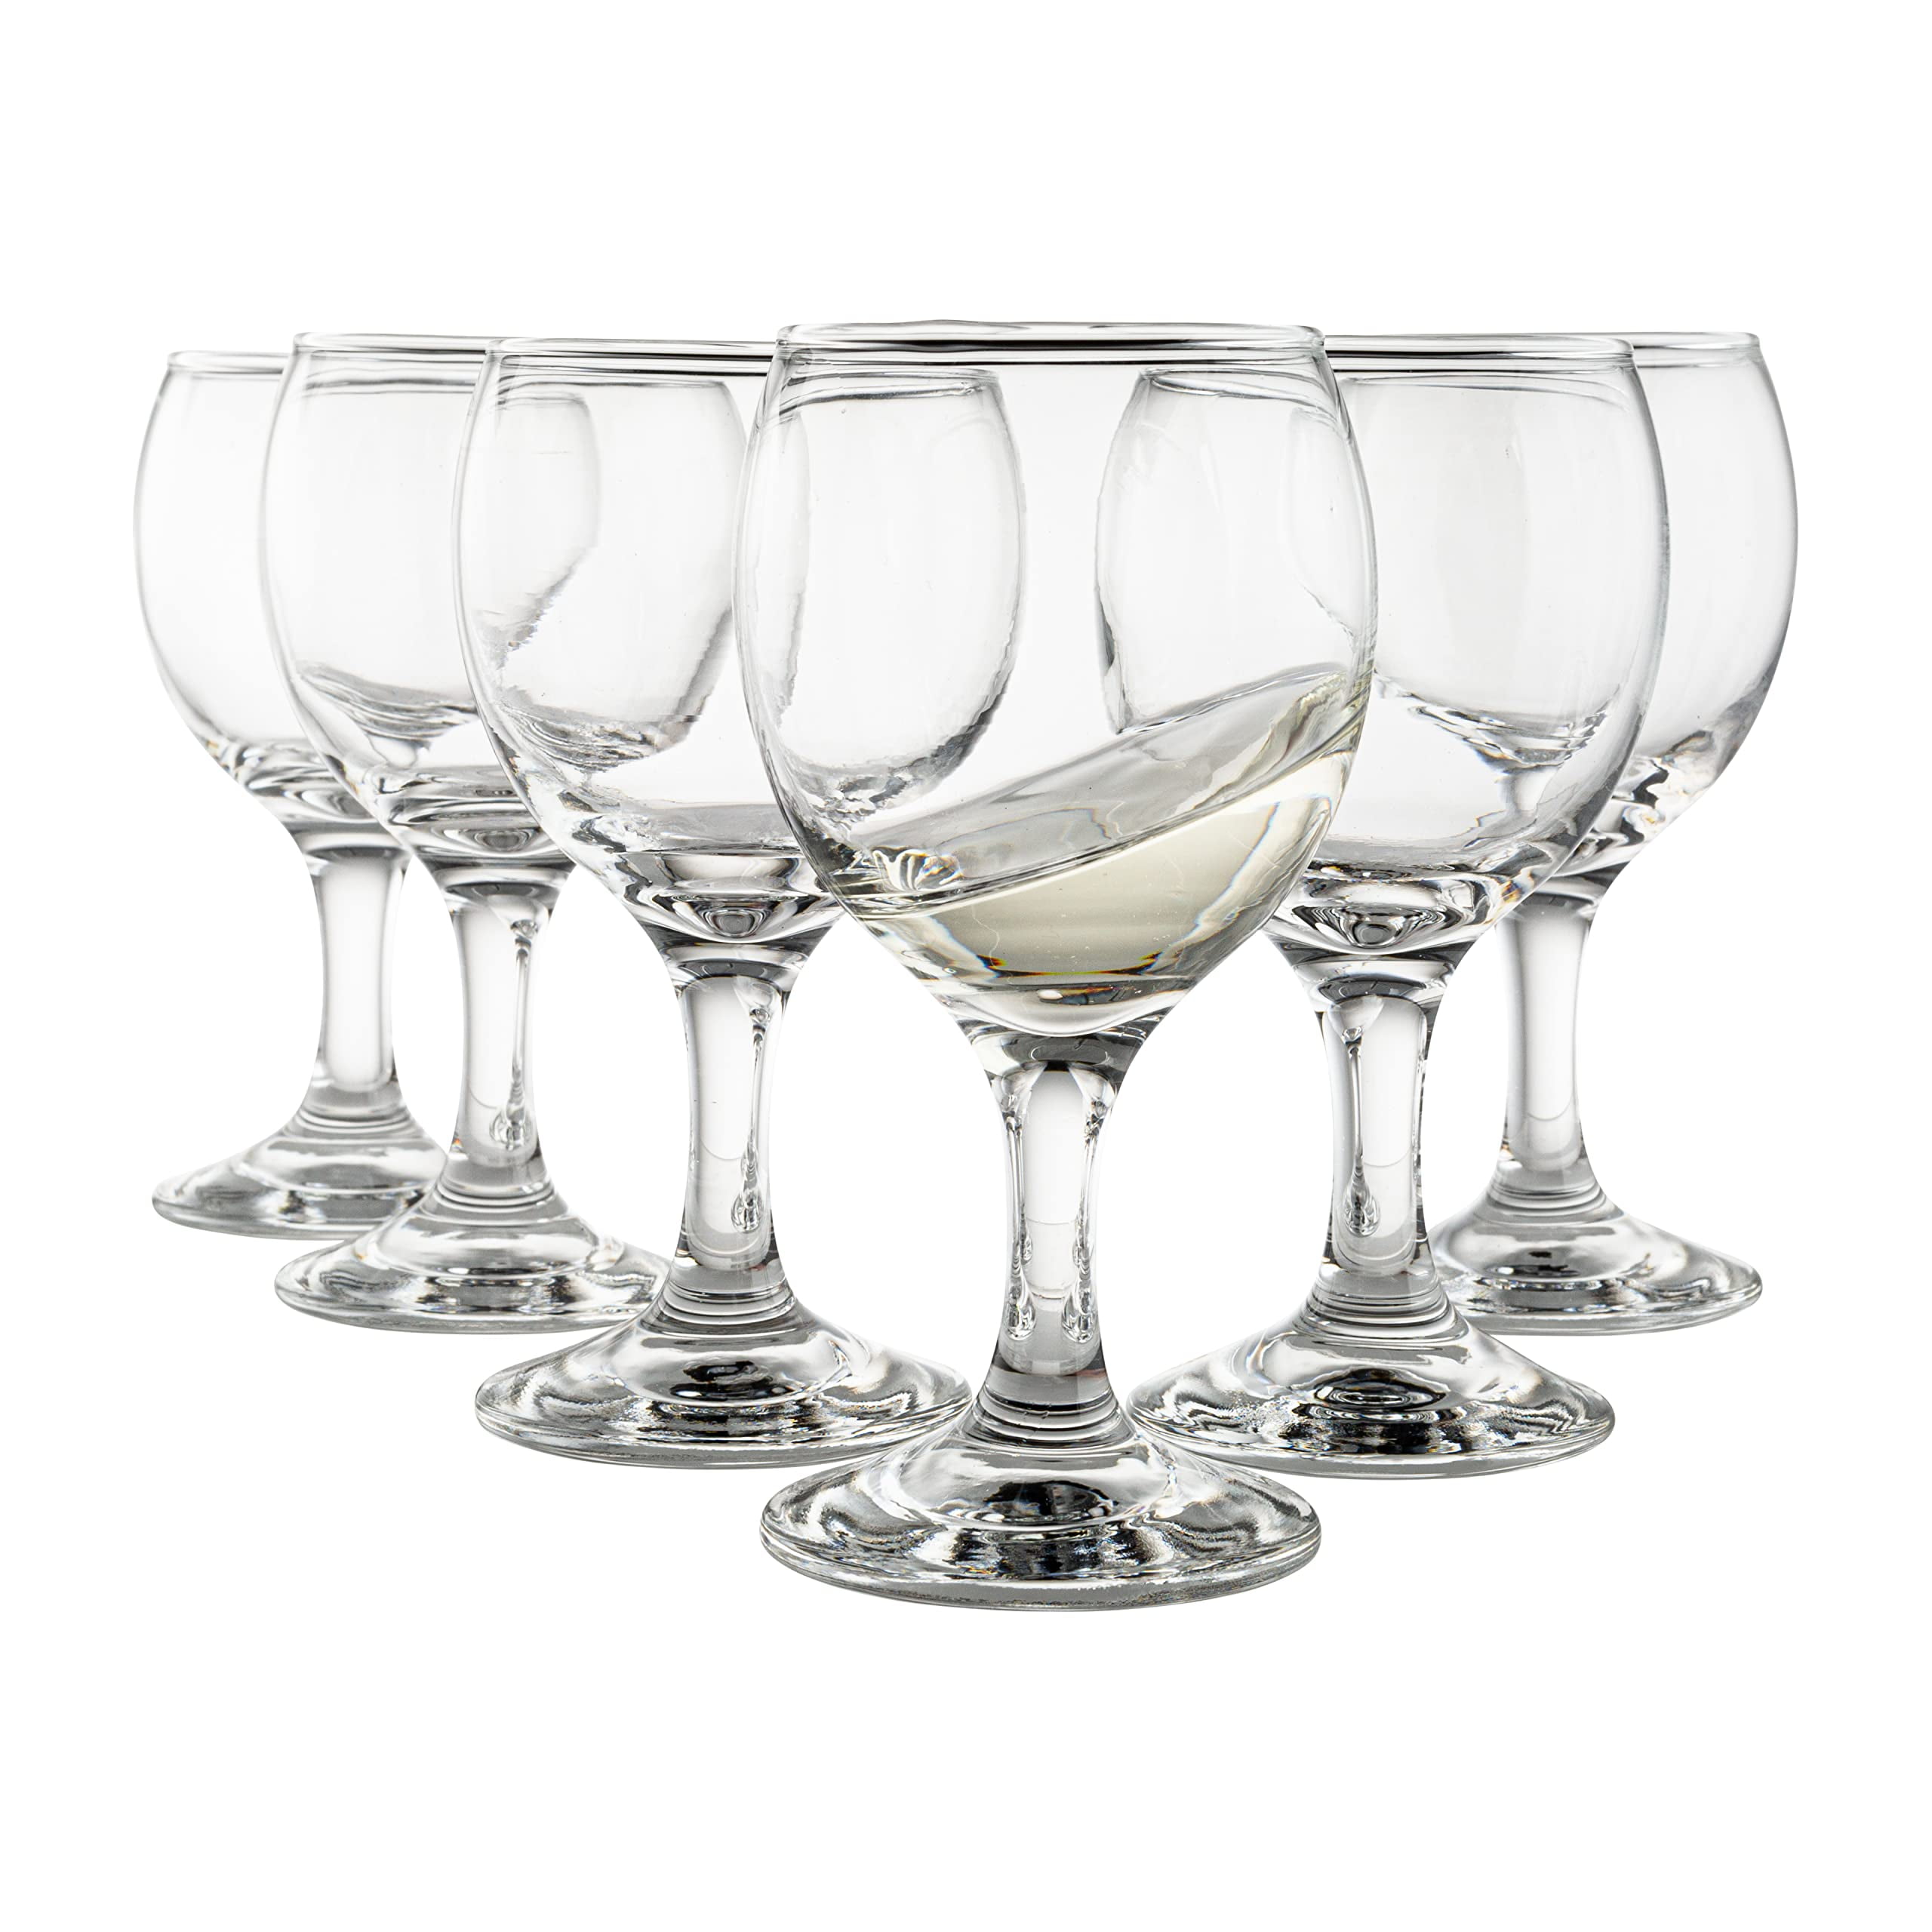 Vikko Small Wine Glasses, 8.75 Ounce | Perfect for Parties, Weddings, and Everyday Thick and Durable Construction Set of 6 Dishwasher Safe Wine